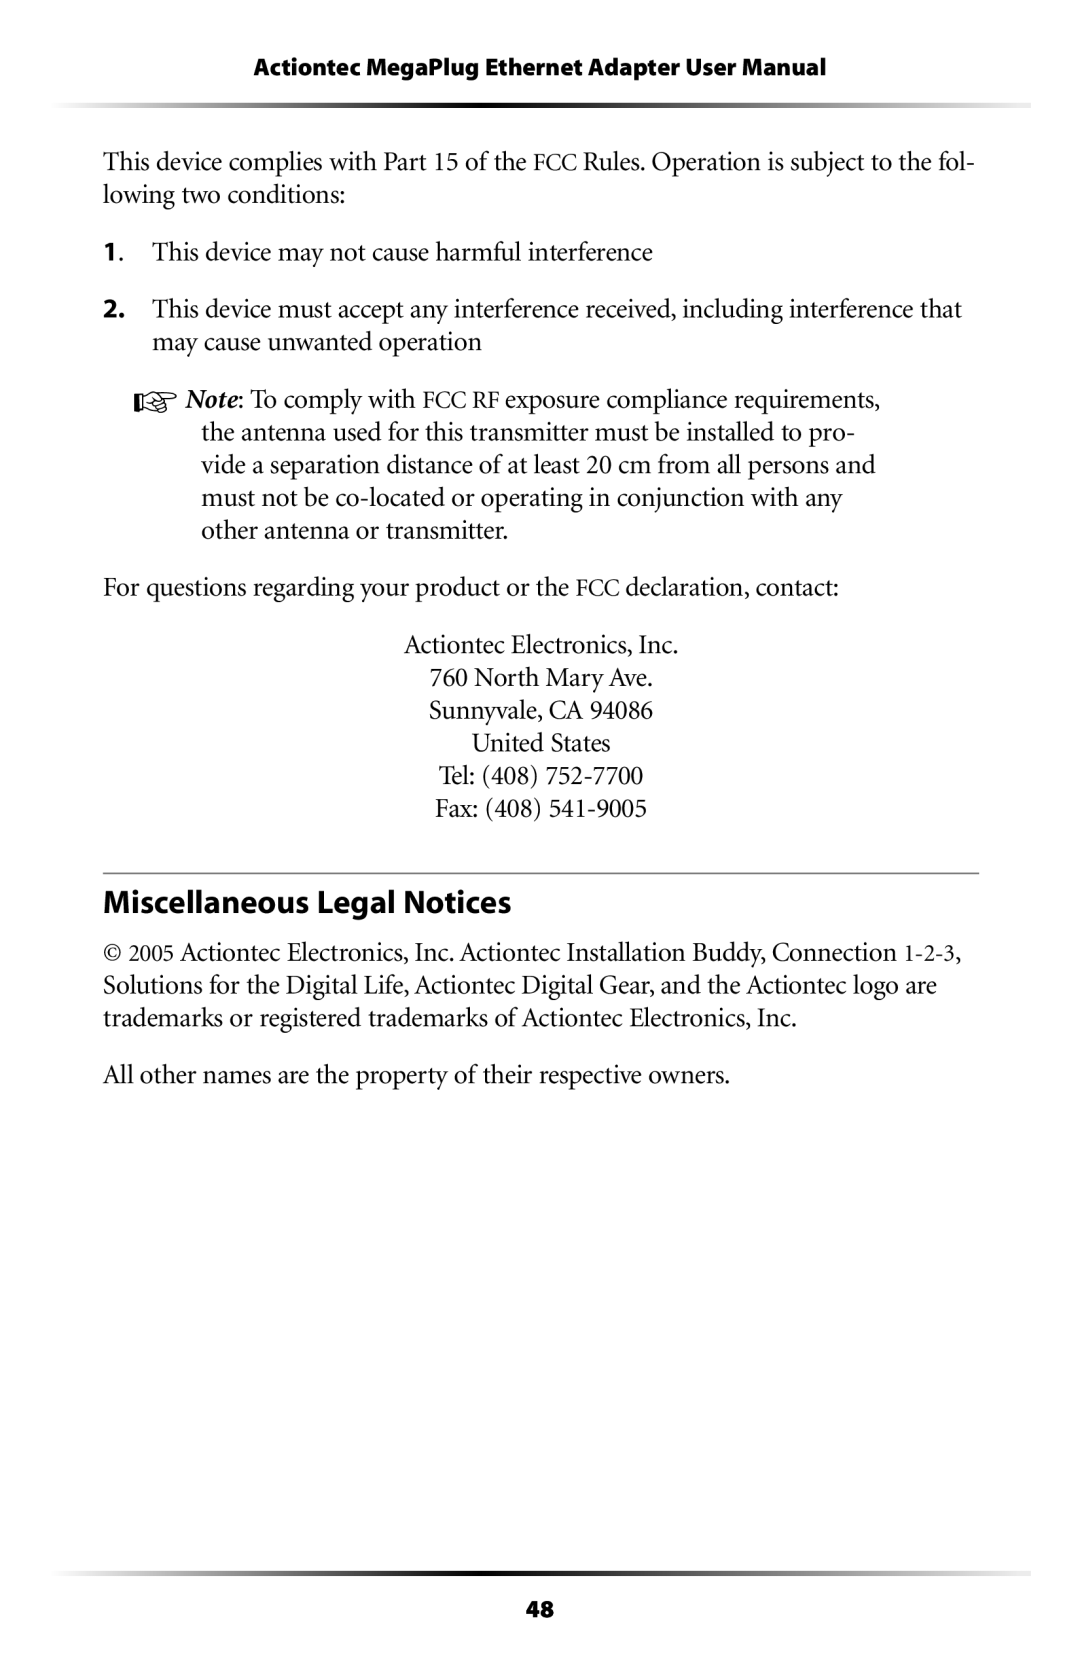 Actiontec electronic HPE100T user manual Miscellaneous Legal Notices 